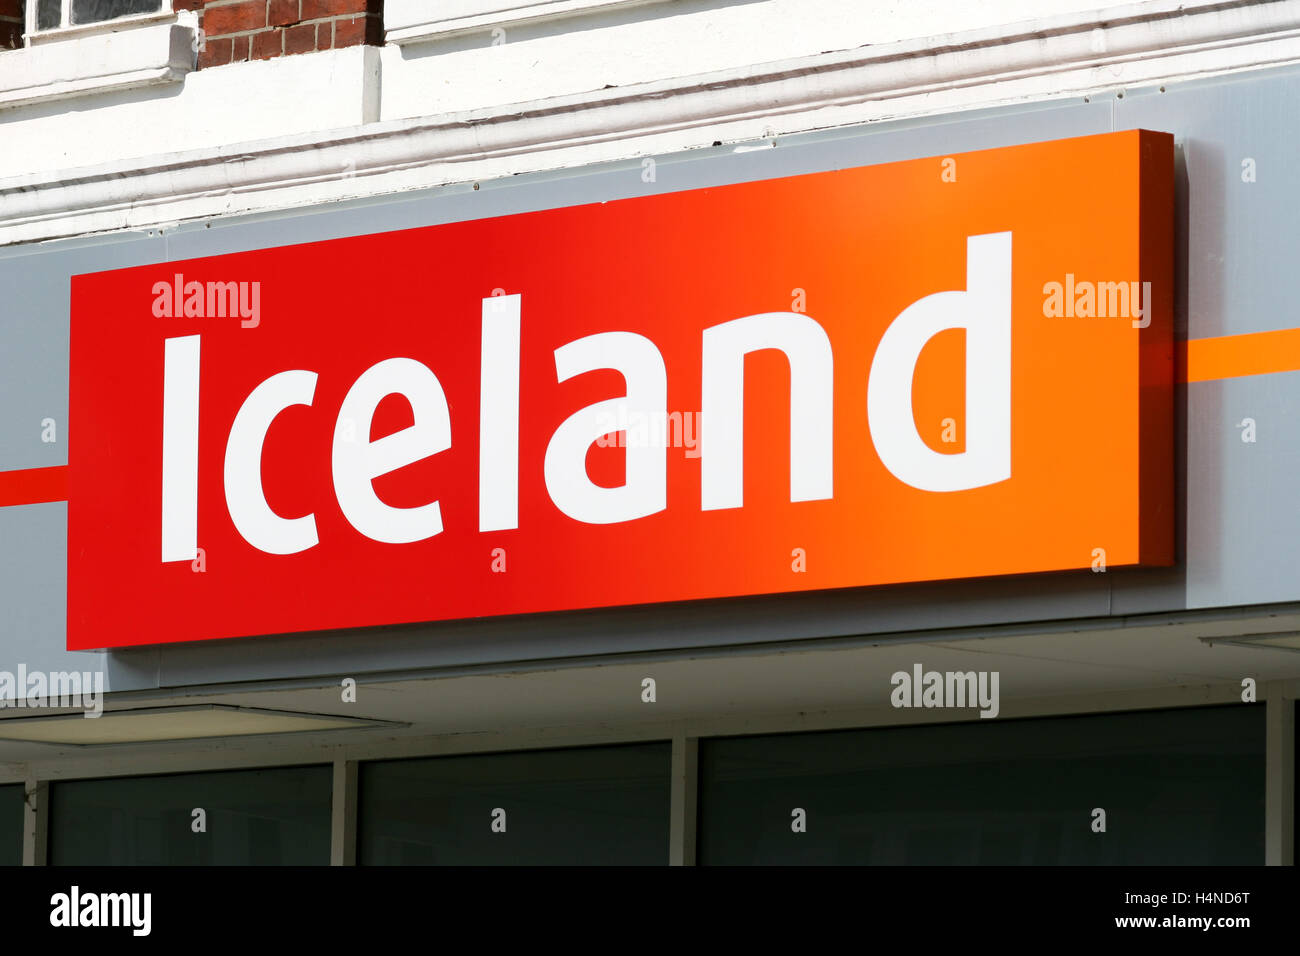 Iceland food shop sign in Braintree, Essex, England Stock Photo